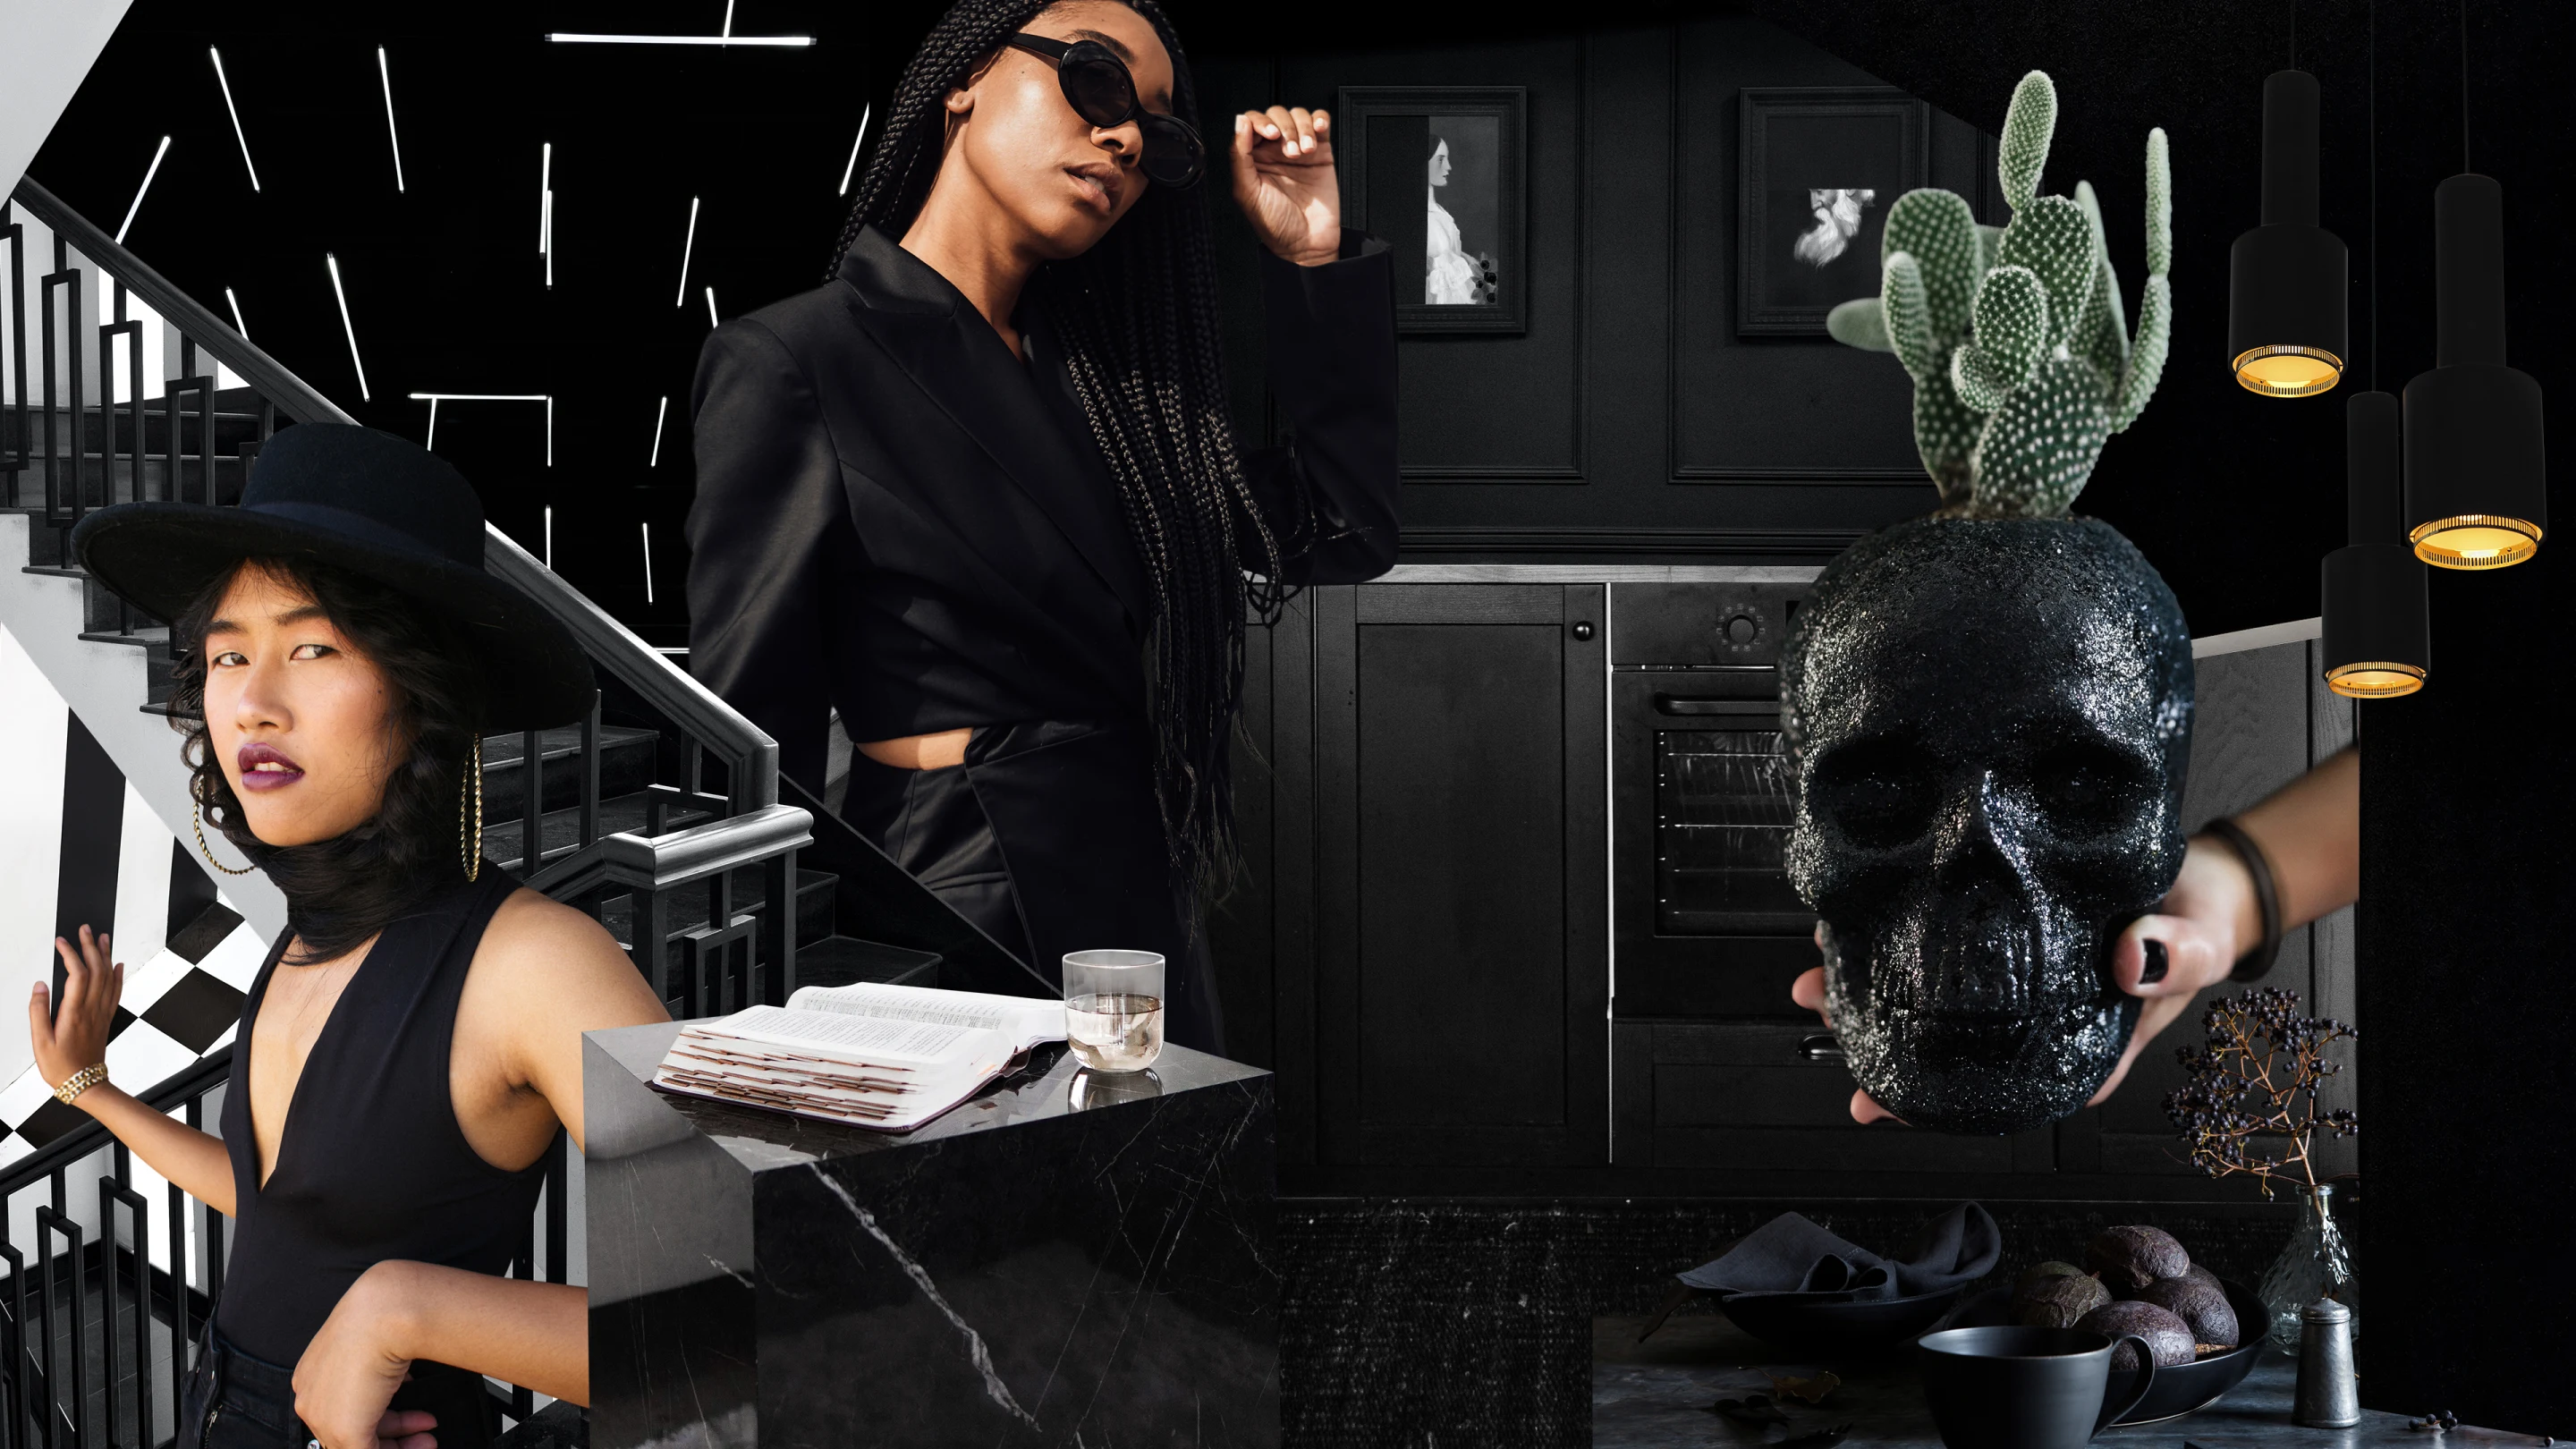 Collage of black items. A black and white staircase moves from left to centre. A black marble cube has a book and a drink on top of it. A Black woman with long hair is wearing black clothes and black sunglasses. A hand with black nail polish is holding a back, skull-shaped plant pot, beside hanging black lamps. An East Asian woman wearing a black hat, dress and scarf is on the left.
